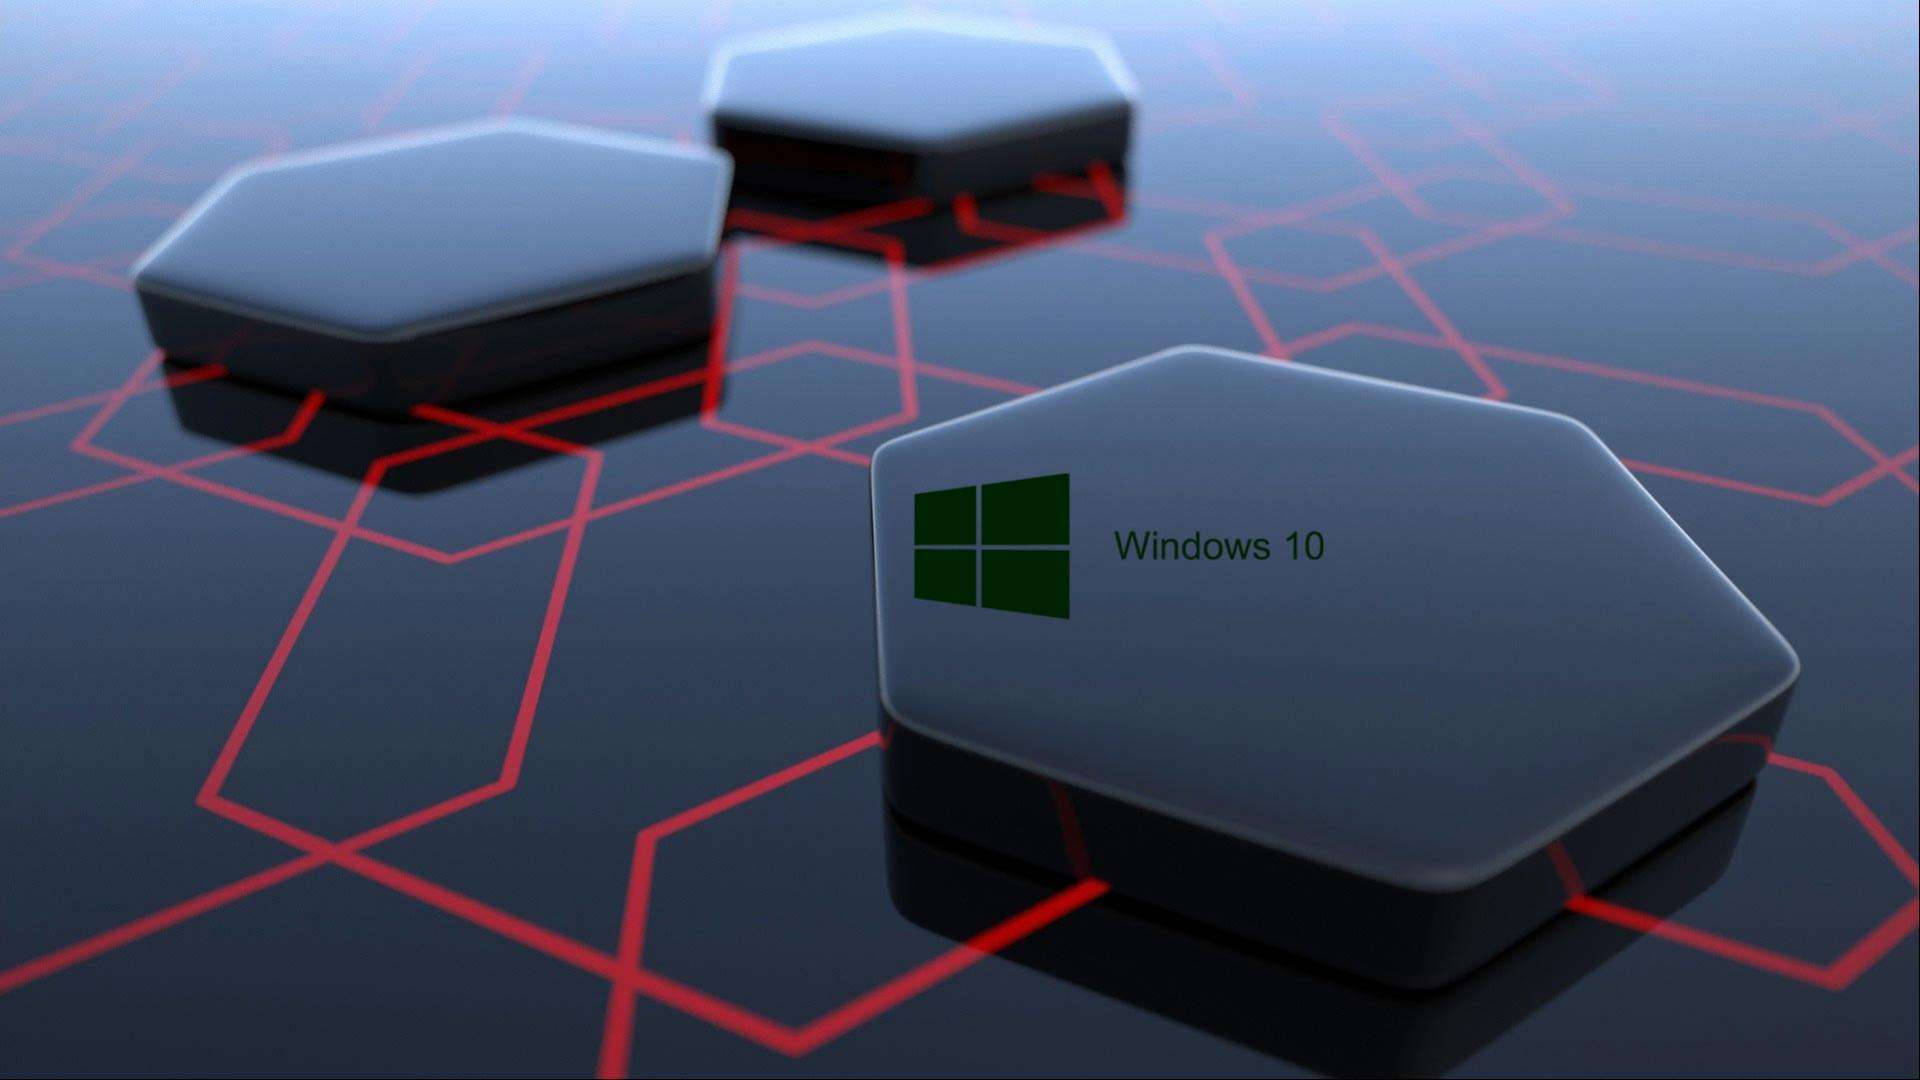 Windows 10 Hd Floating Hexagons Background